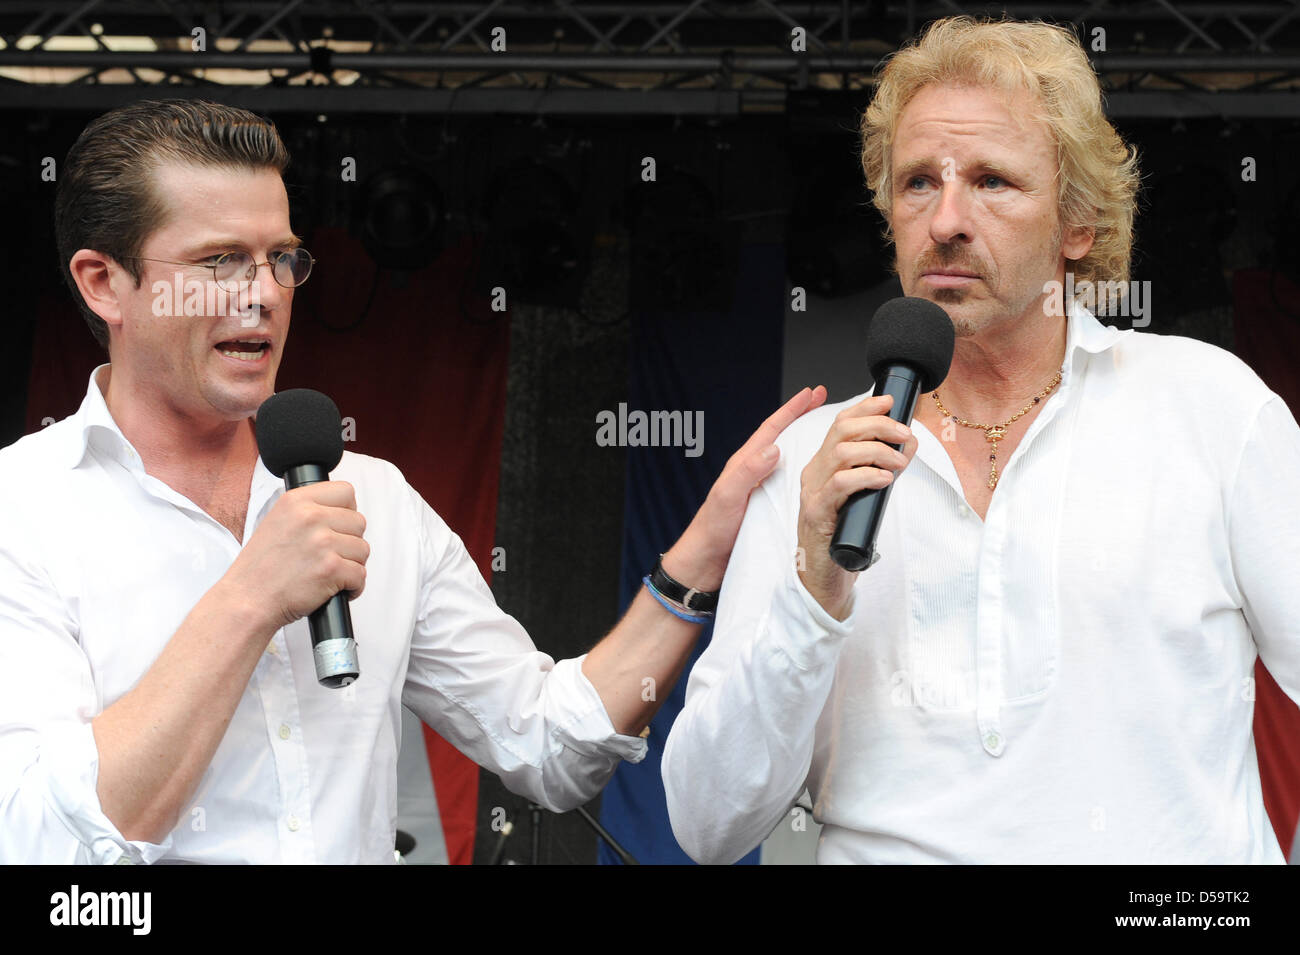 German minister of defence Karl-Theodor zu Guttenberg  (L-CDU) and TV-entertainer Thomas Gottschalk (R) come to the stage in Kulmbach (Upper Franconia) on 'The Day of the Franconians' (Tag der Franken). The Day should remember the foundation of the Franconian Circle on the 2 July 1500. The day is dedicated to the Fraconian history and aims at cultivating Franconian traditions. Phot Stock Photo